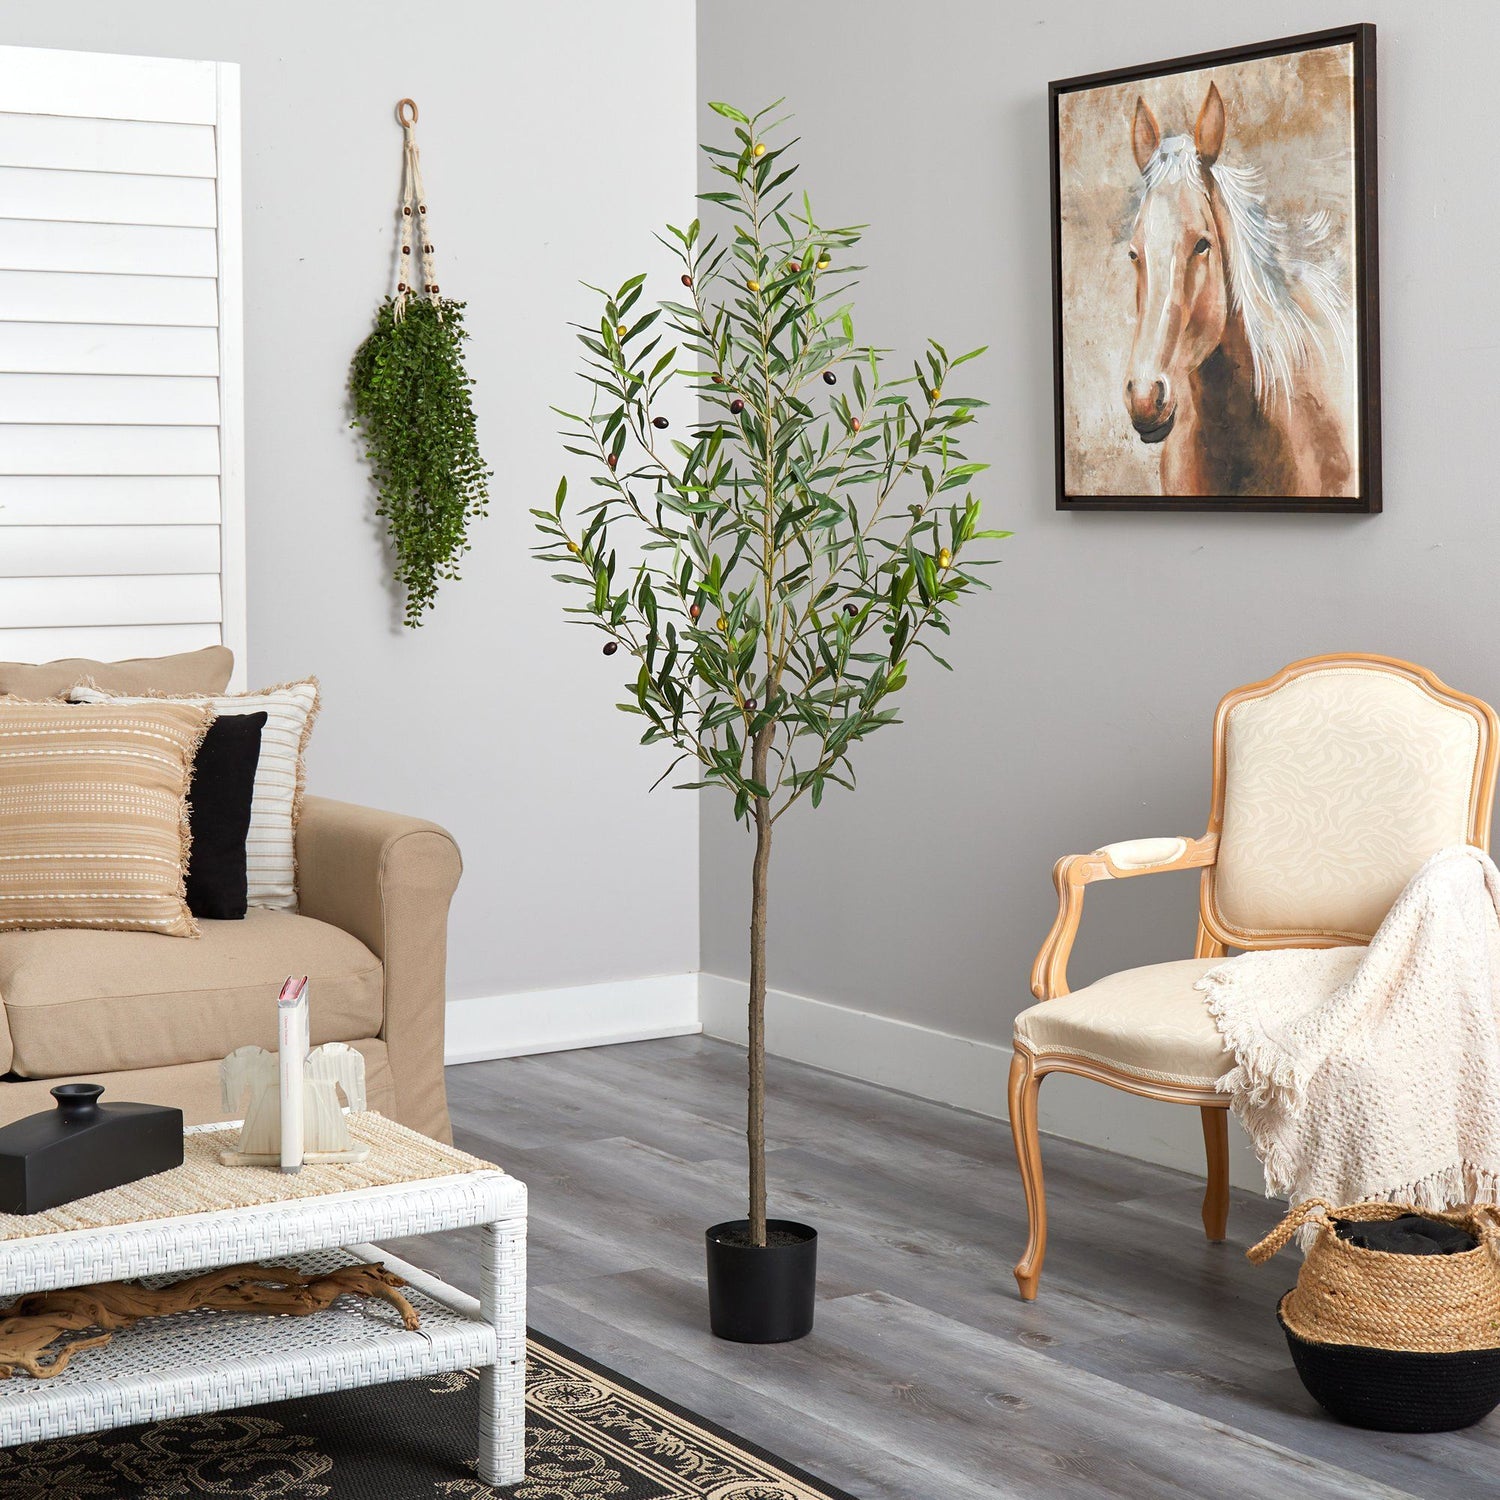 6’ Olive Artificial Tree